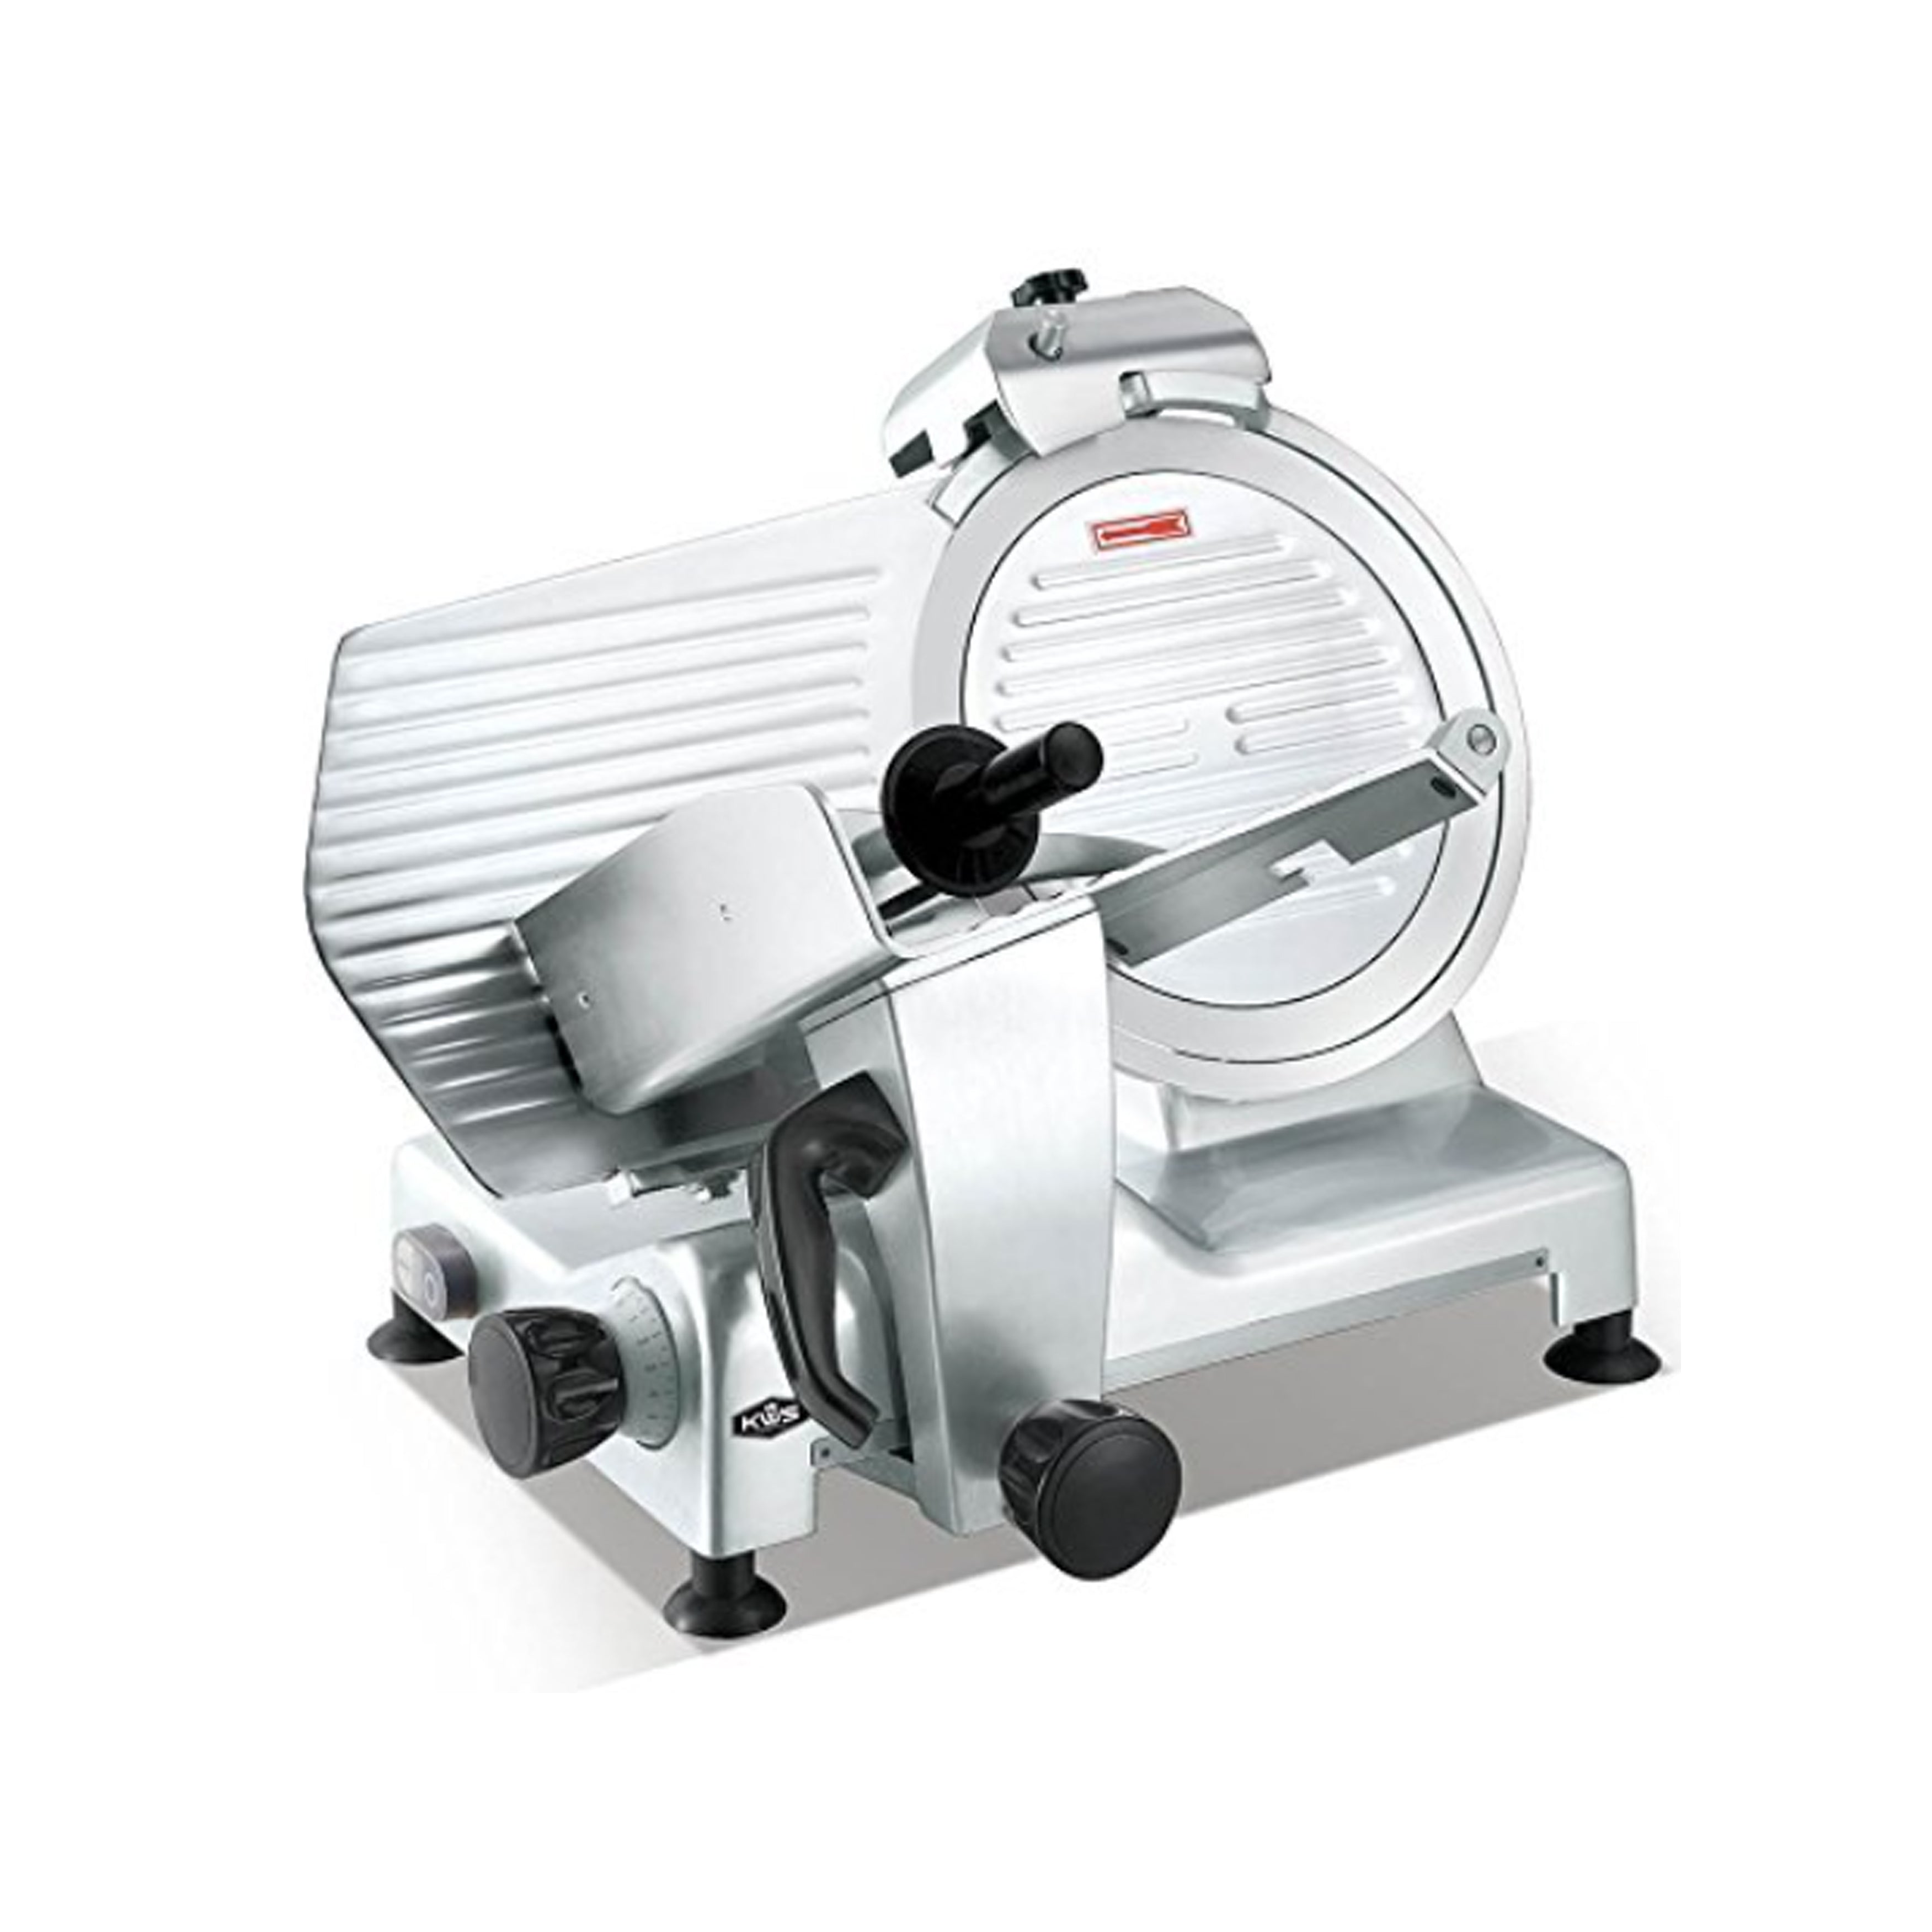 KWS - MS-12SL, Commercial 12″ Electric Meat Slicer Triple Safety Locks with Stainless Steel Blade